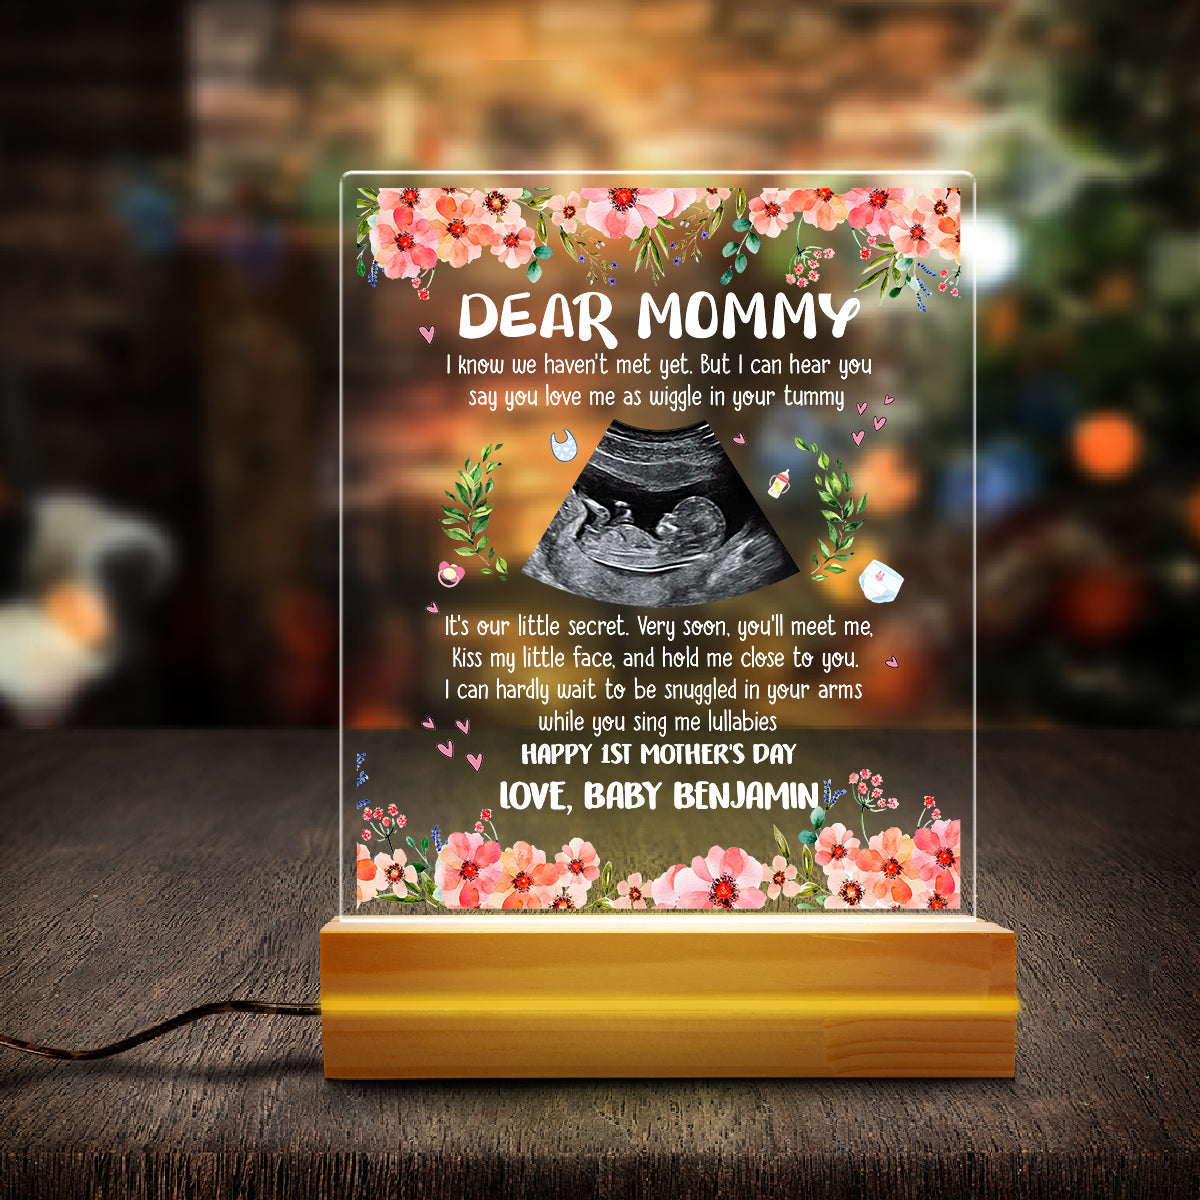 Dear Mommy From Baby Bump I Can Hear You Say You Love Me Custom Ultrasound Photo 3D Led Light 1St Mother's Day Gifts, New Mom Gifts